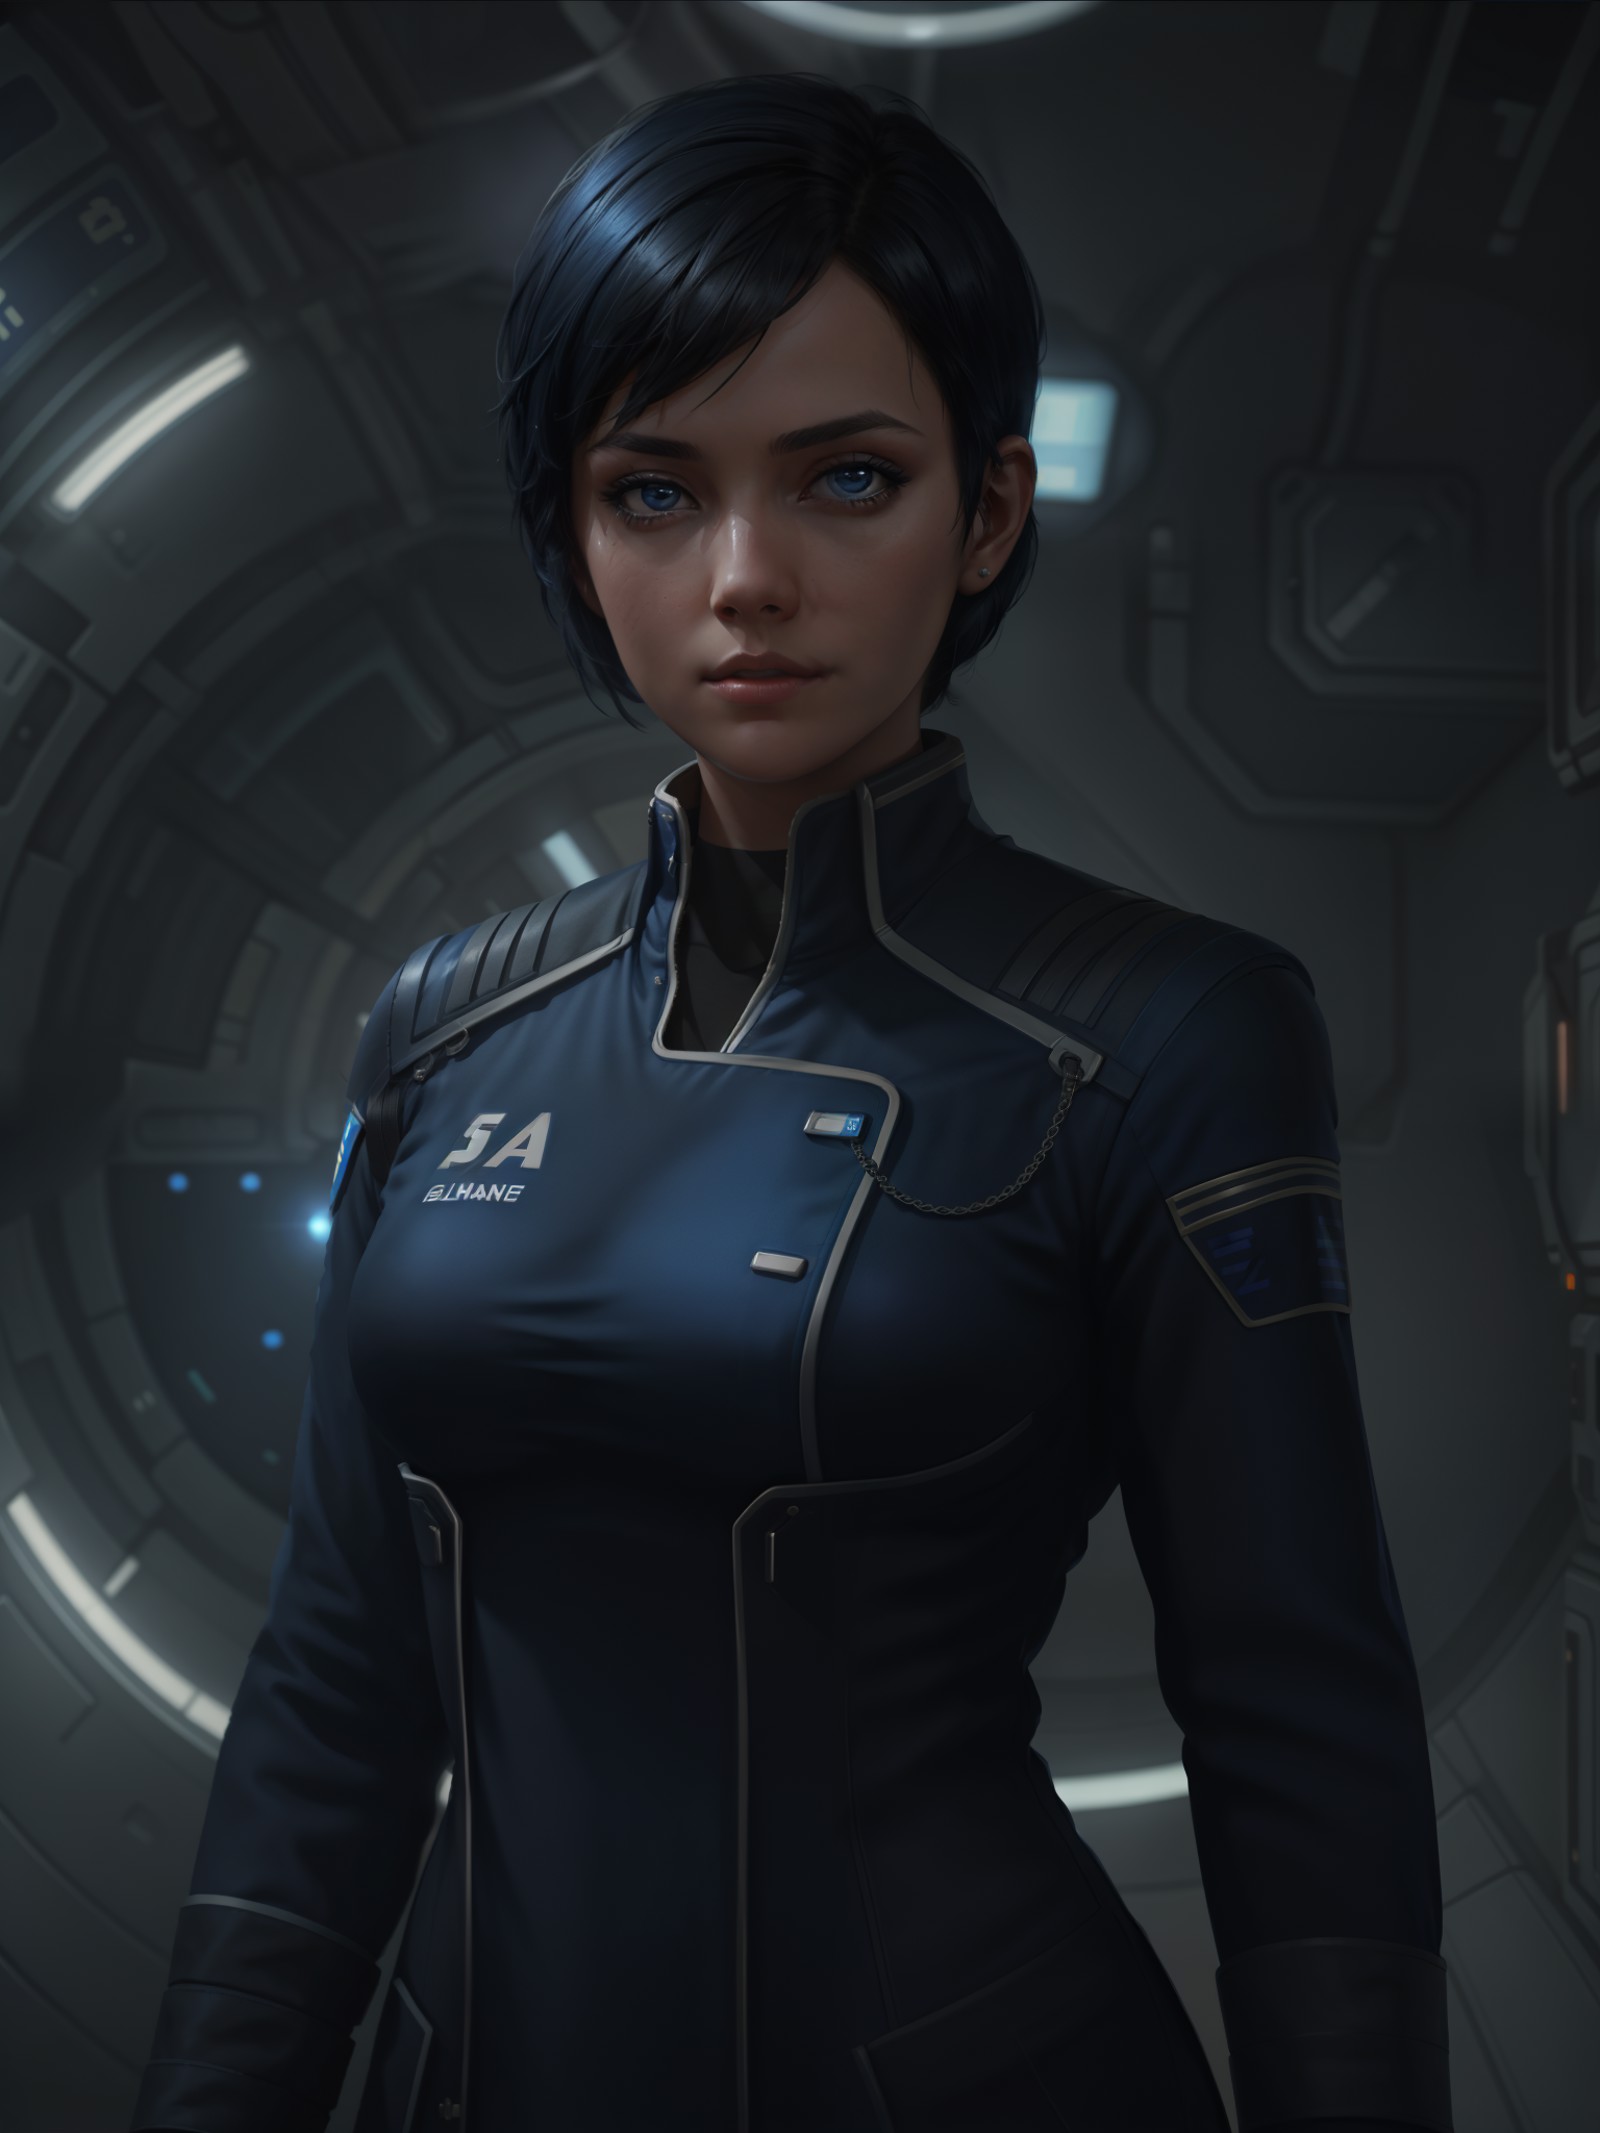 a woman with short black hair wearing (blue allianceuniform) in a space station, cute face, realistic skin, dramatic light...